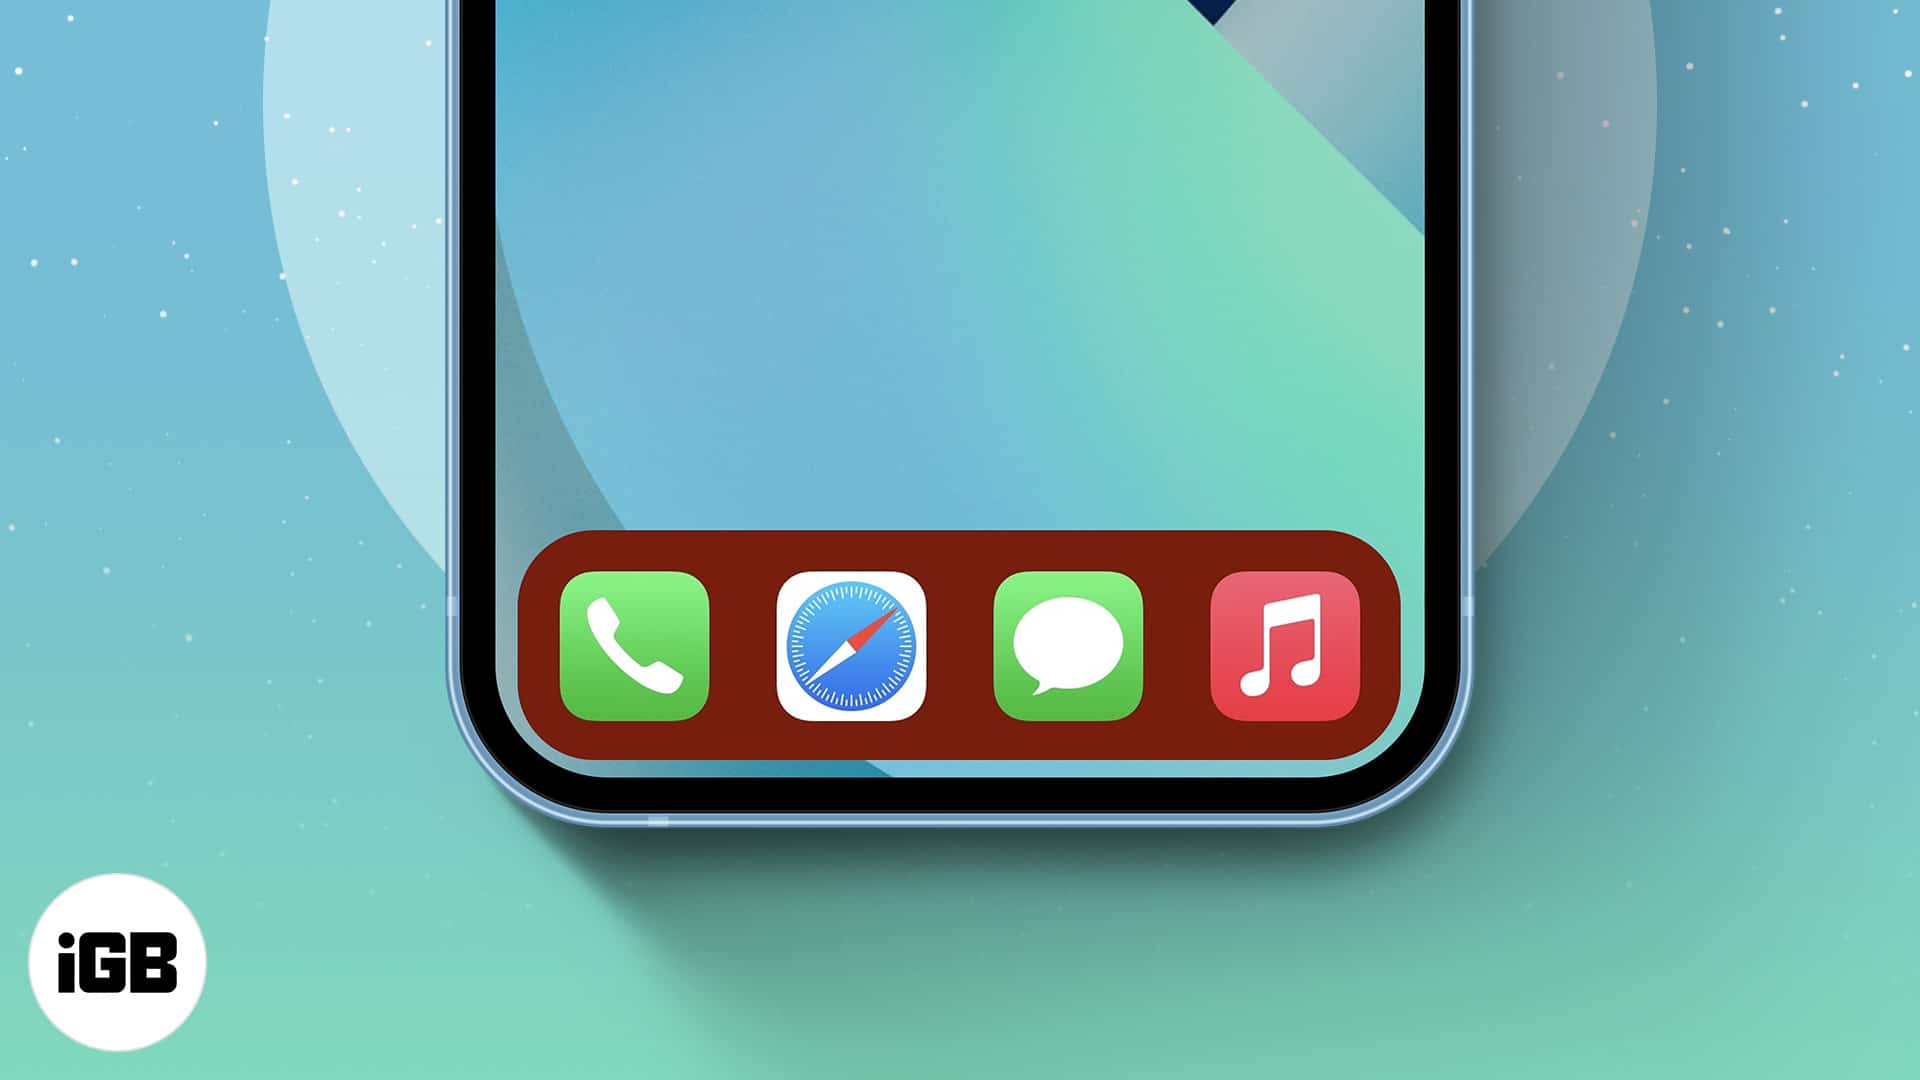 How to change the dock color on iphone and ipad